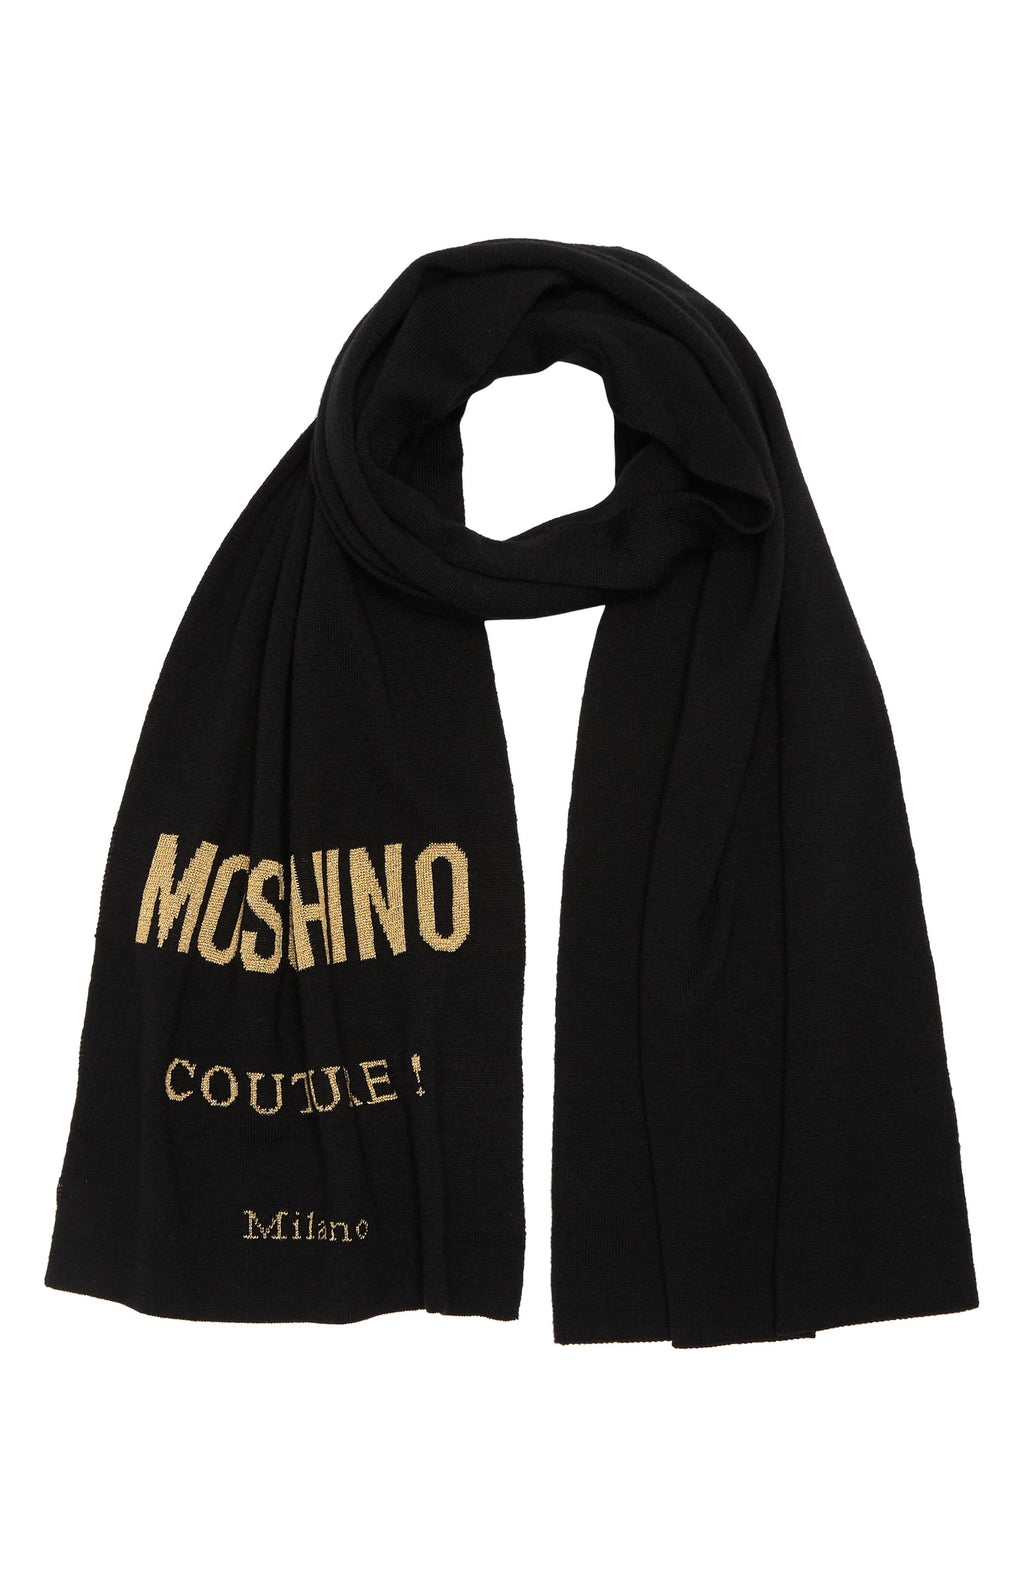 Moschino Print Wool Blend Scarf, Main, color, BLACK